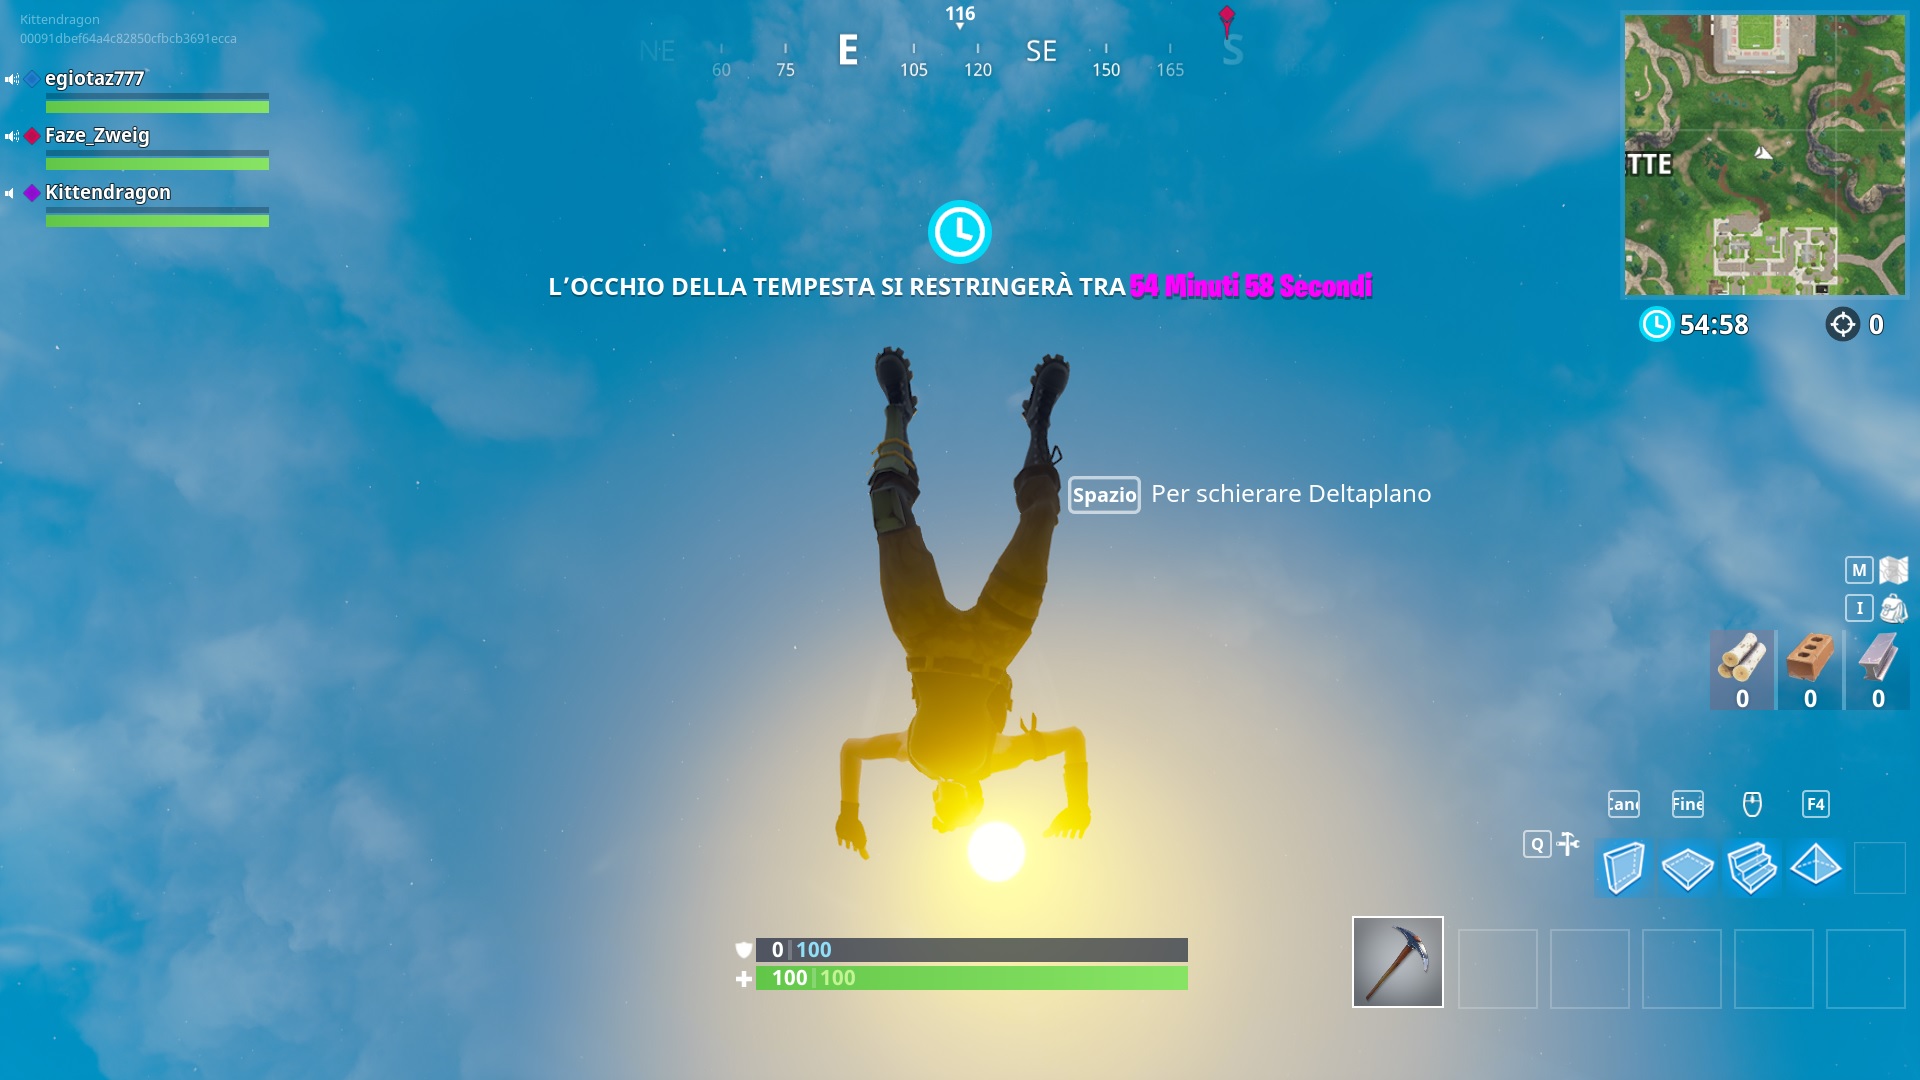 Media asset (photo, screenshot, or image in full size) related to contents posted at 3dfxzone.it | Image Name: Fortnite_Screenshot_7.jpg